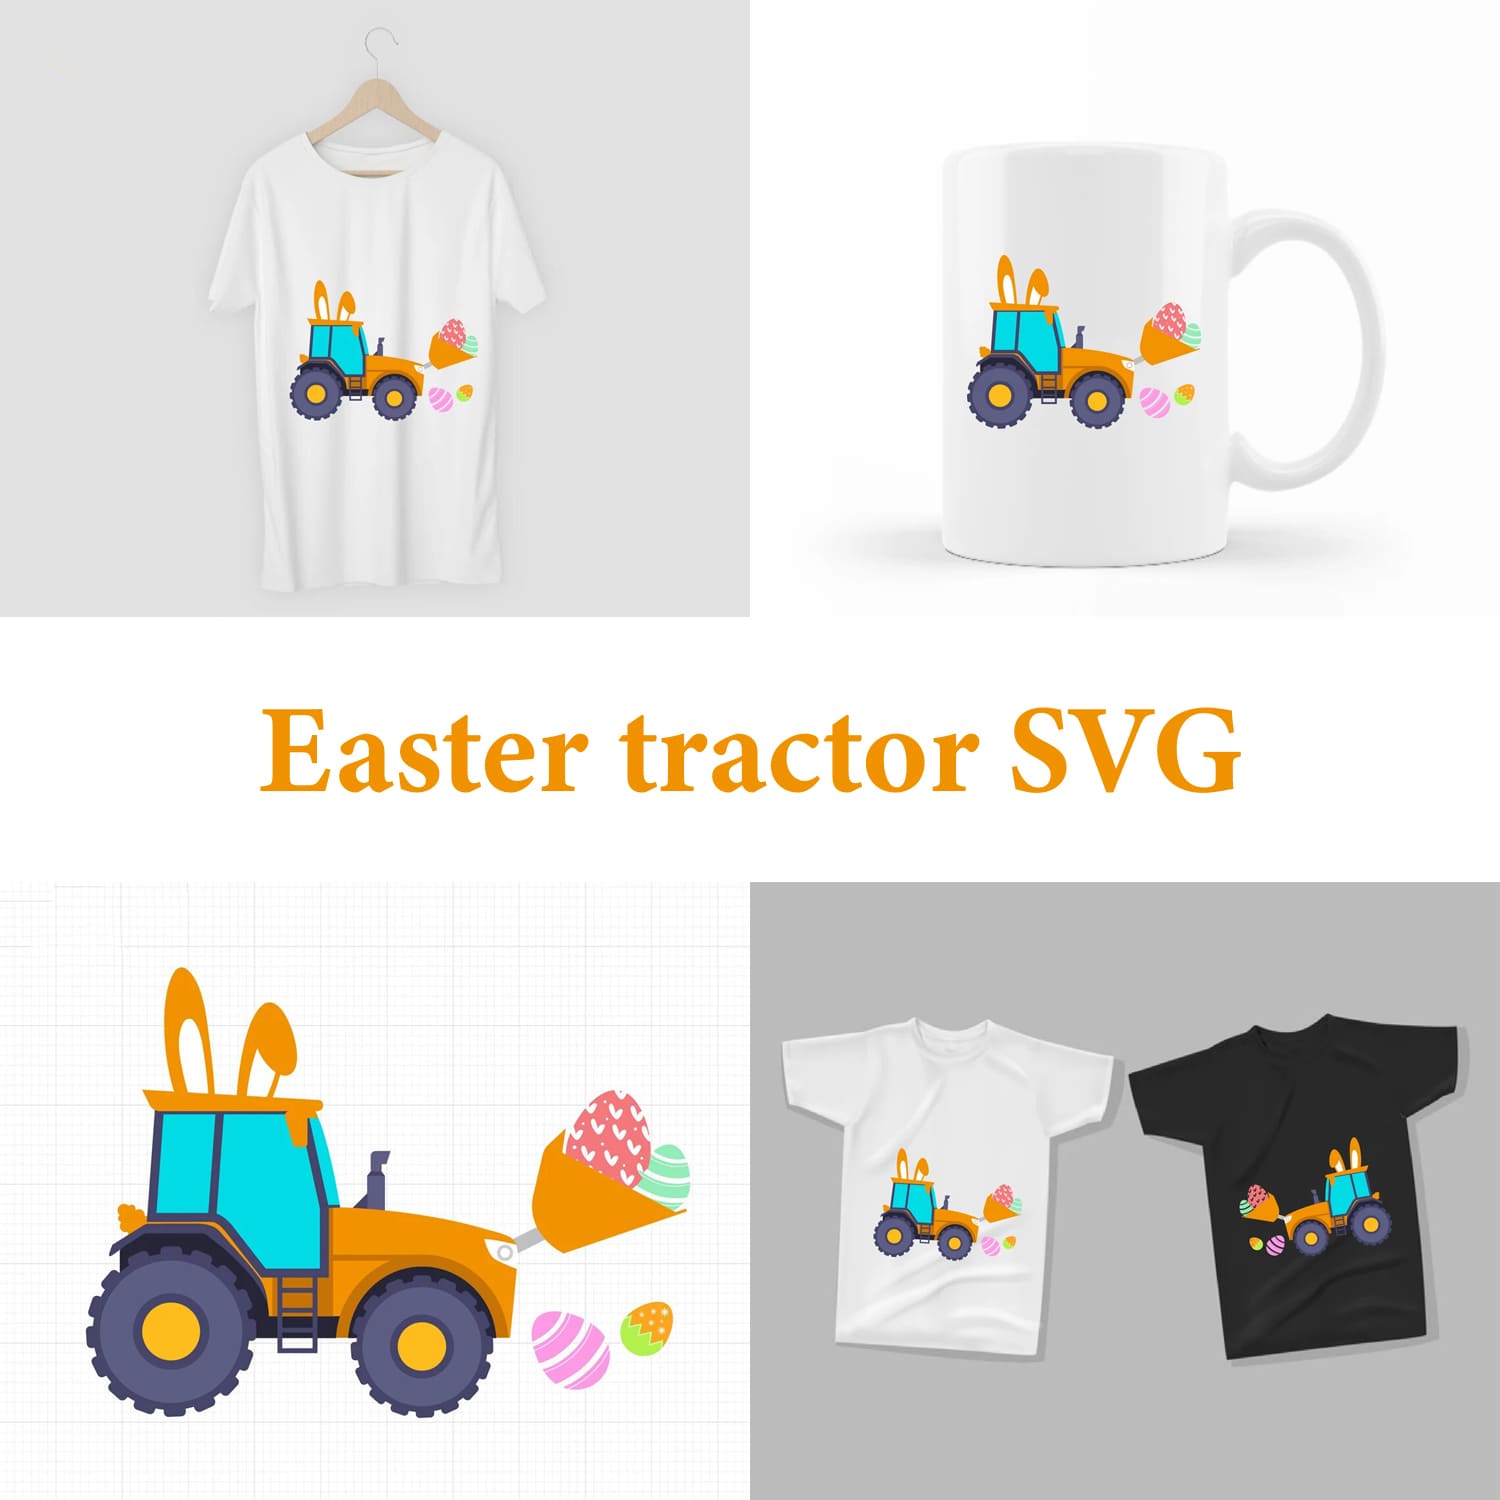 Easter Tractor SVG cover image.